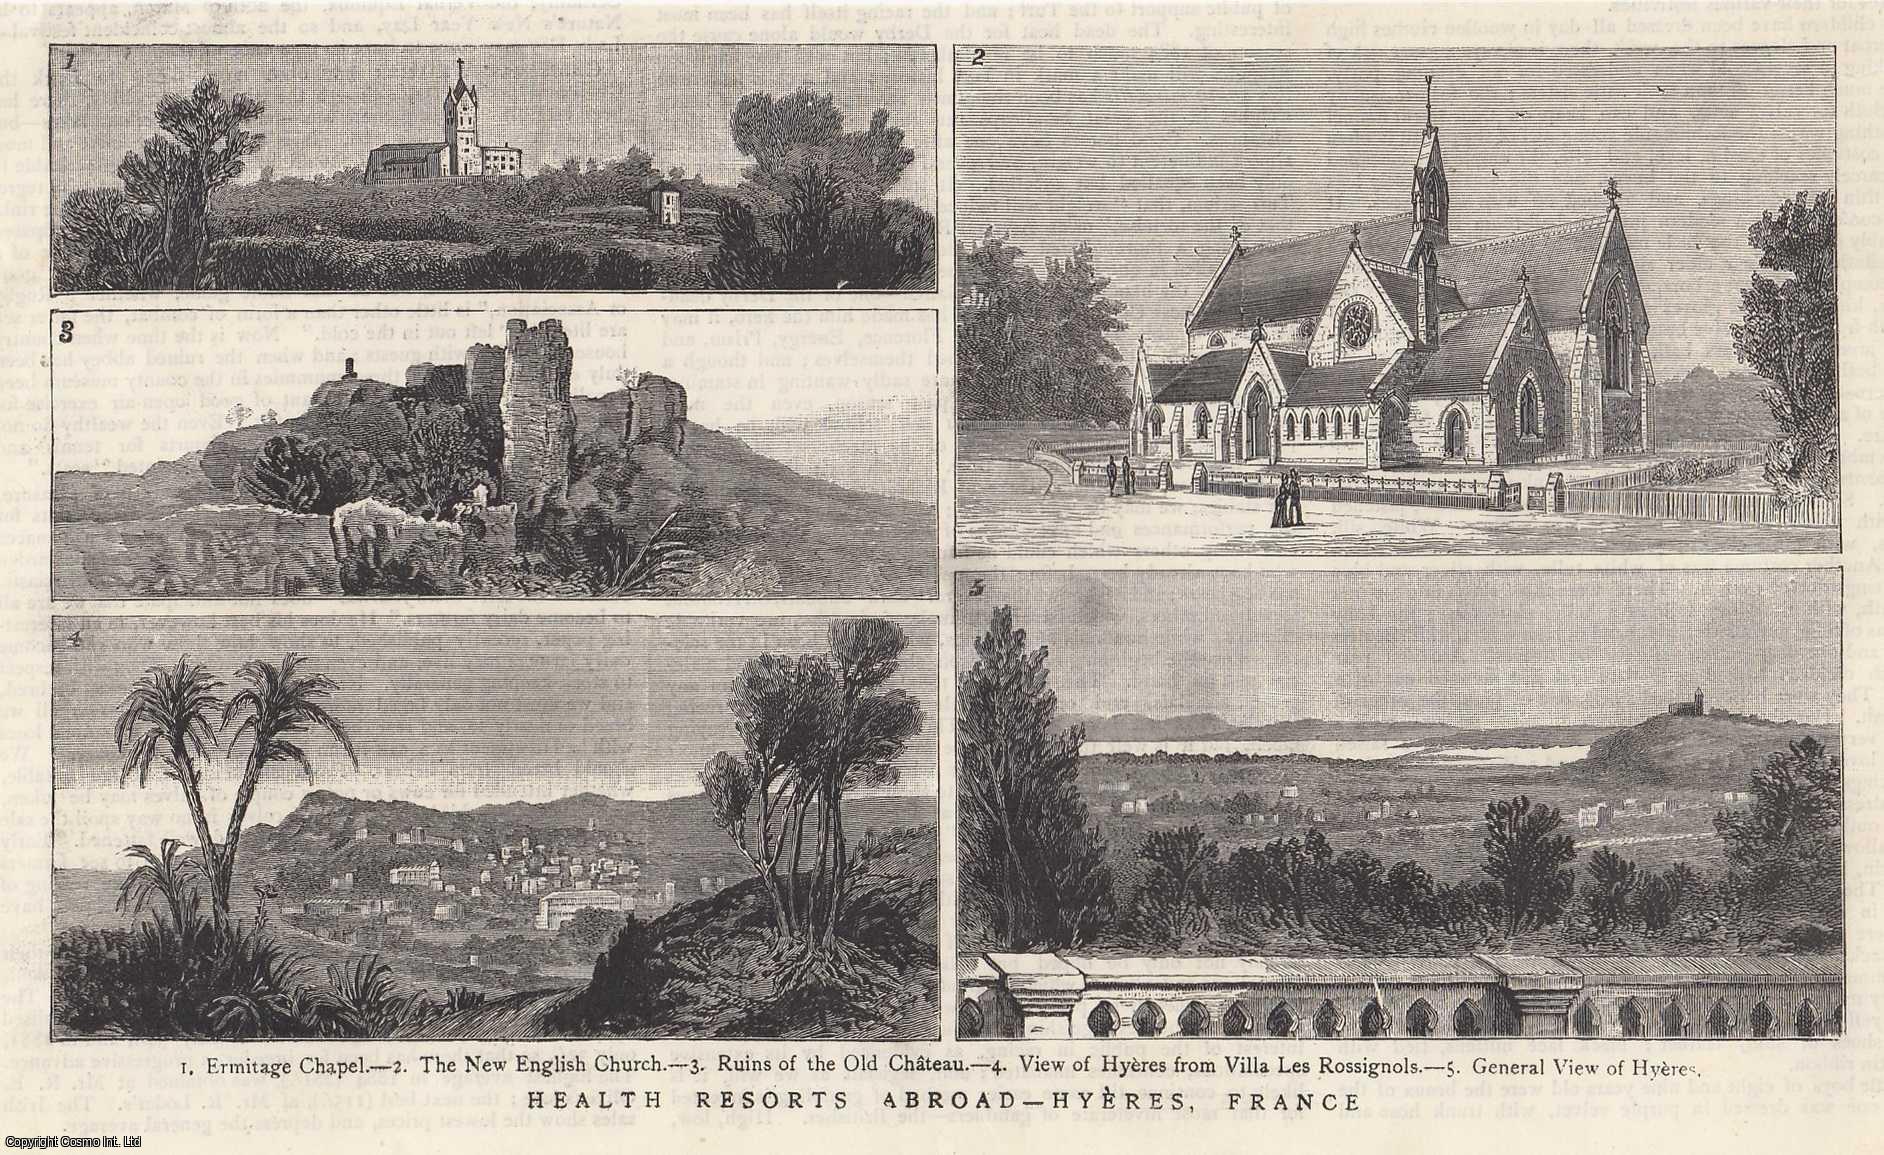 Hyeres, France - Health Resorts Abroad - Hyeres, France. A series of vignettes illustrating various scenes. An original print from the Graphic Illustrated Weekly Magazine, 1885.